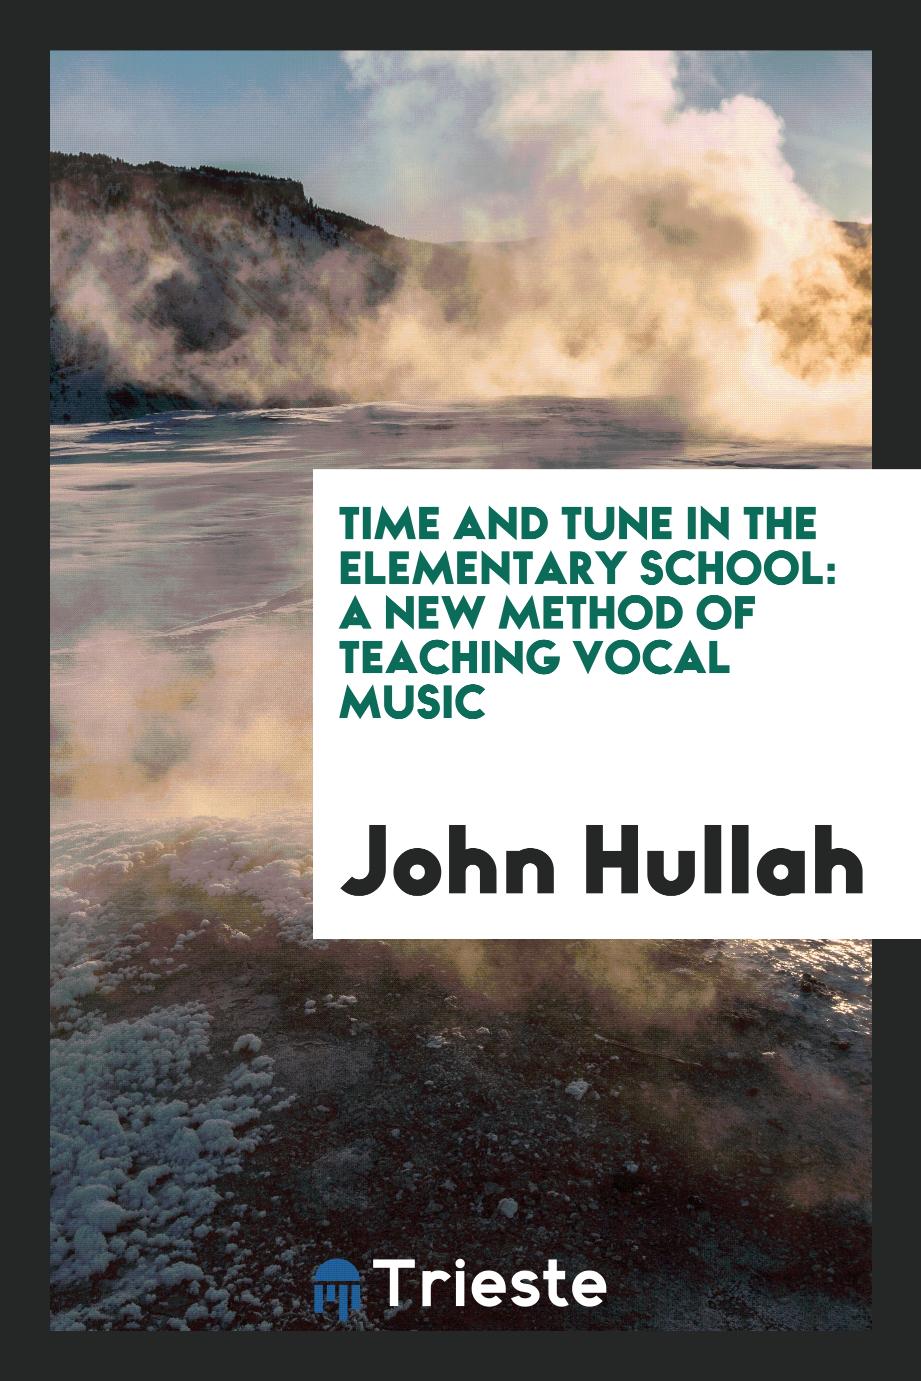 Time and Tune in the Elementary School: A New Method of Teaching Vocal Music